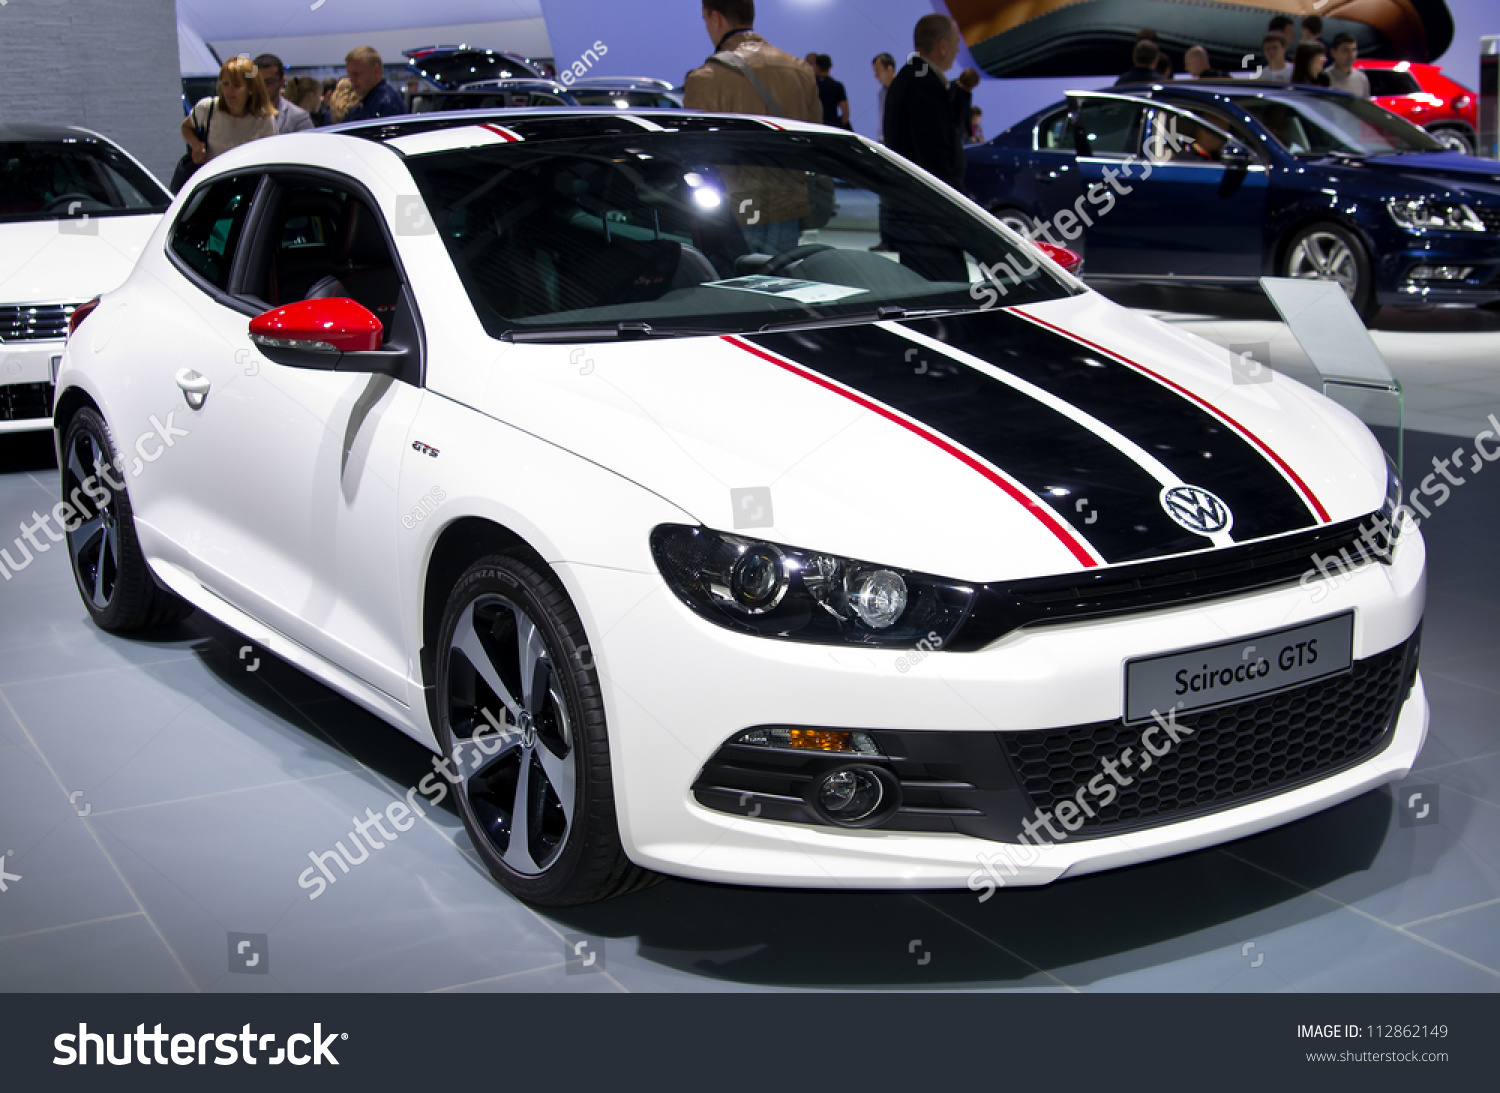 Moscowseptember 6 Volkswagen Scirocco Gts Moscow Stock Photo Edit Now